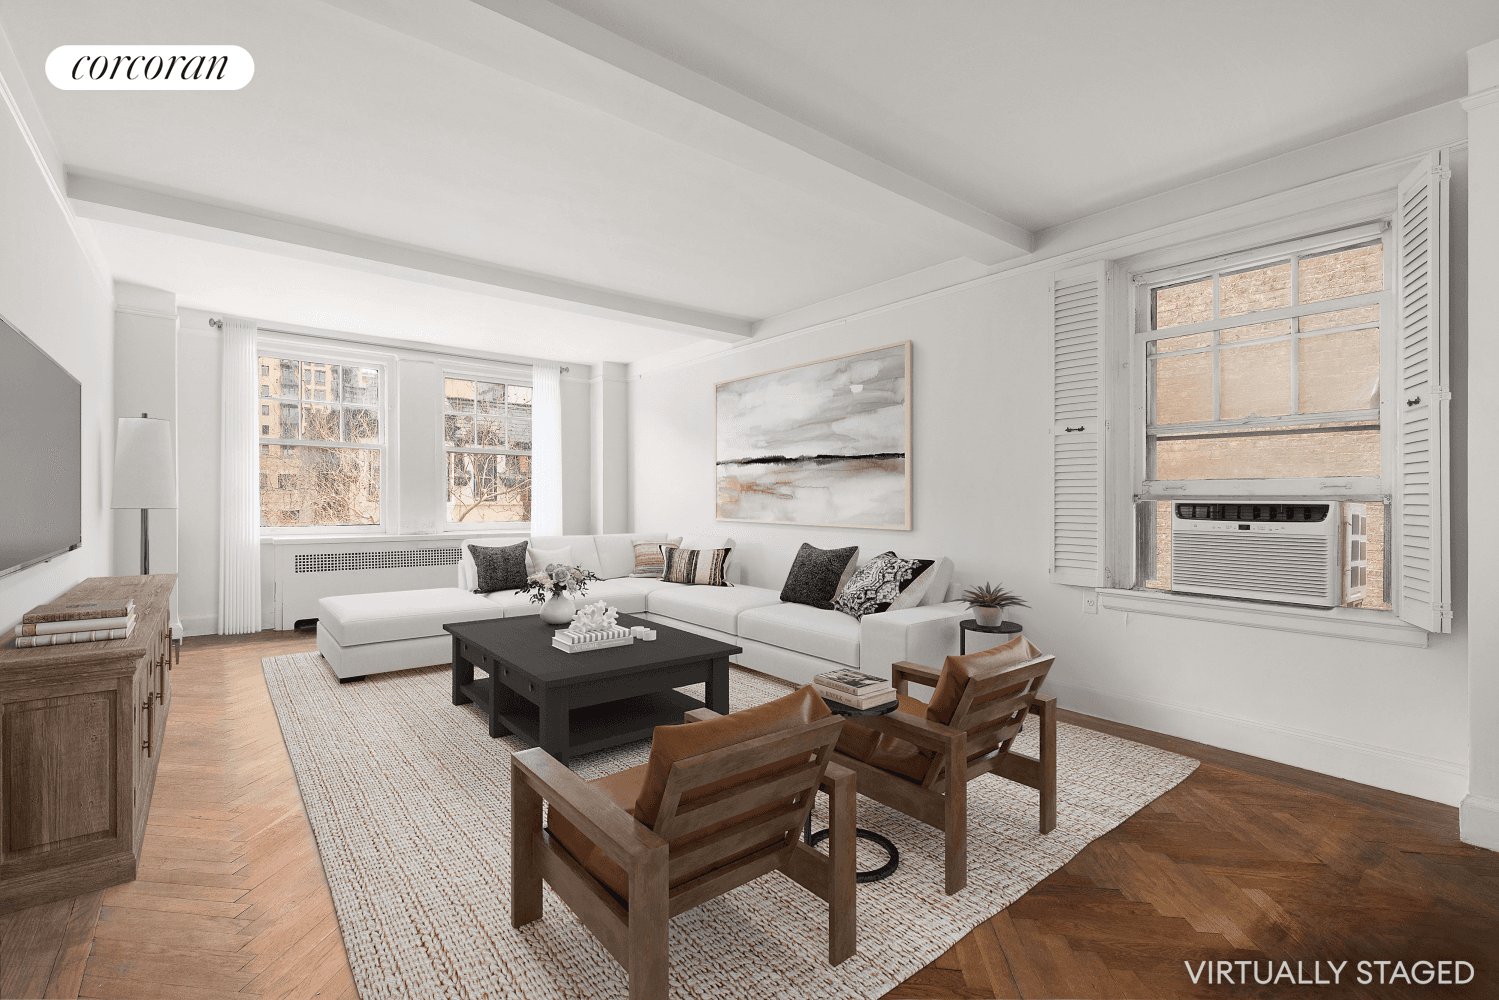 Apartment 5E at 336 West End Avenue is an oversized 1 bedroom apartment in a divine location on the Upper West Side.